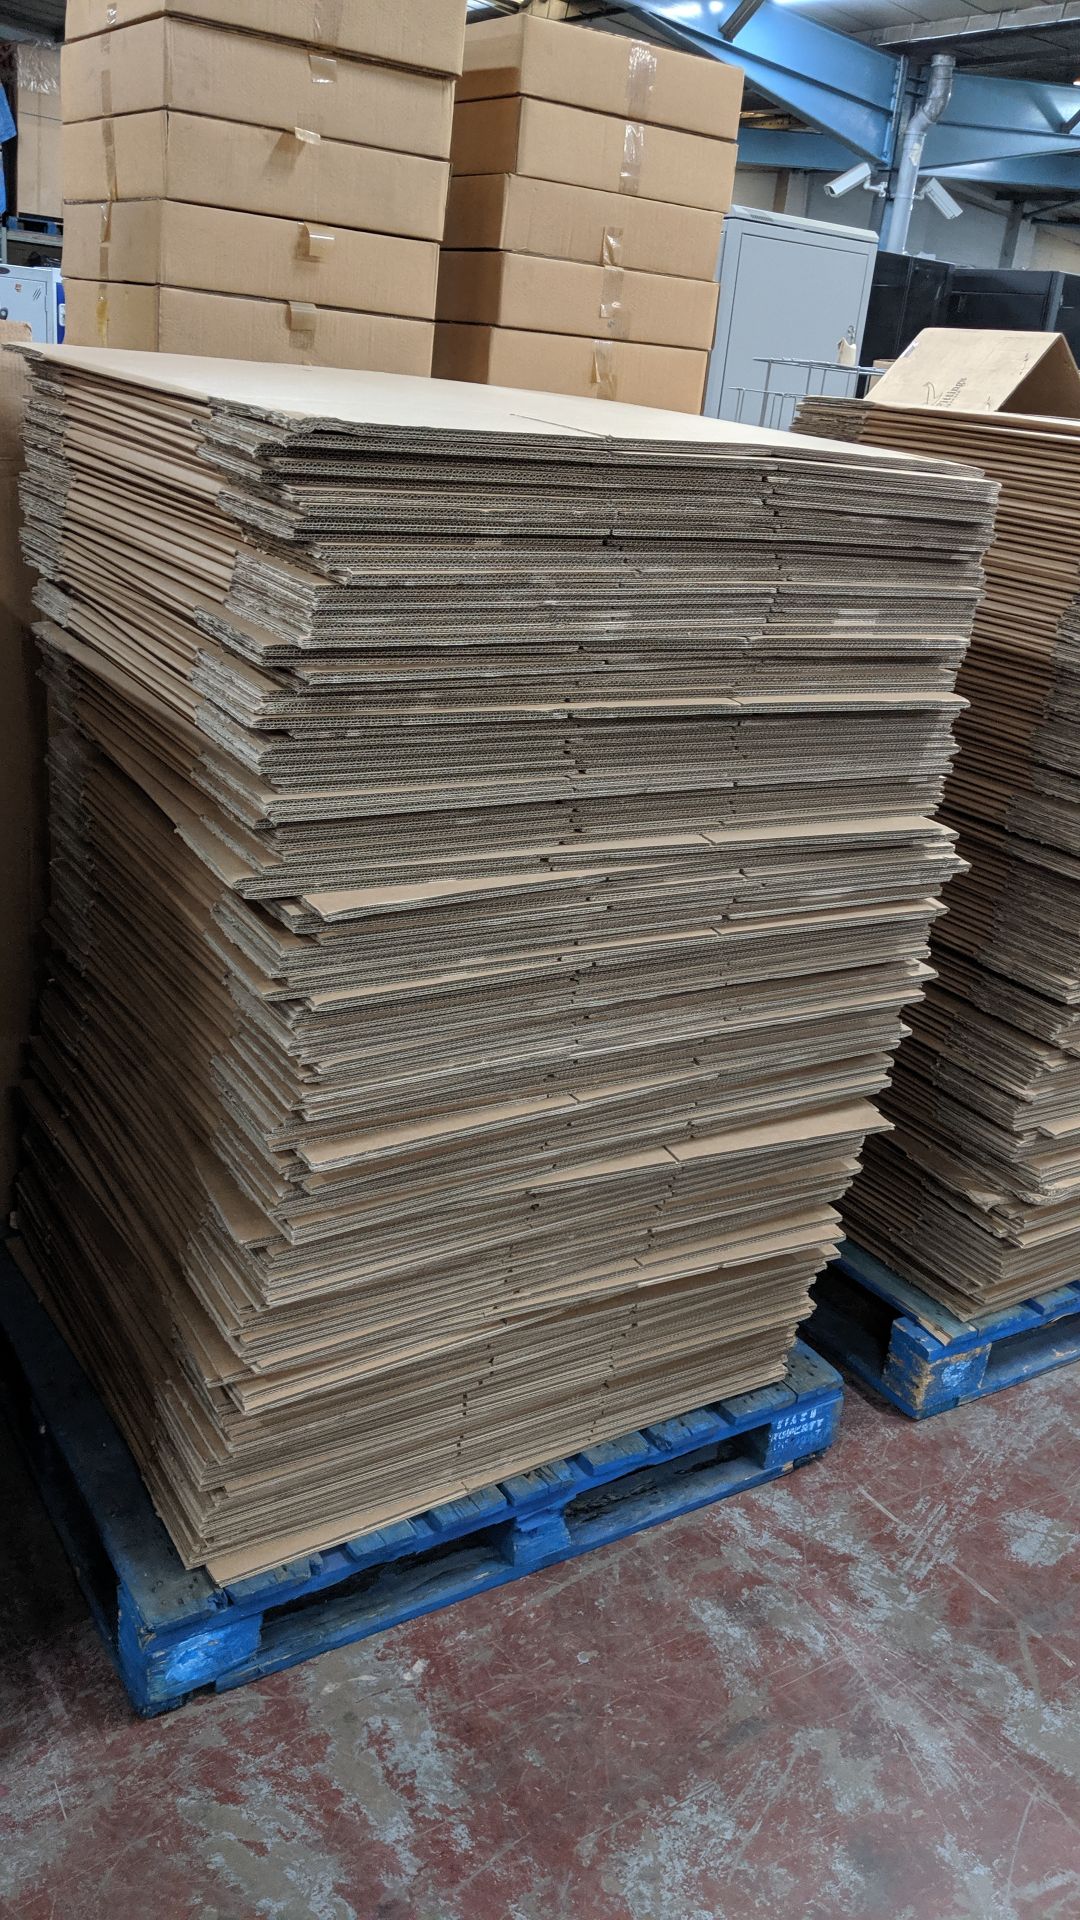 Approx. 100 cardboard boxes, each measuring approx. 620mm x 390mm x 520mm - this lot consists of the - Image 2 of 3